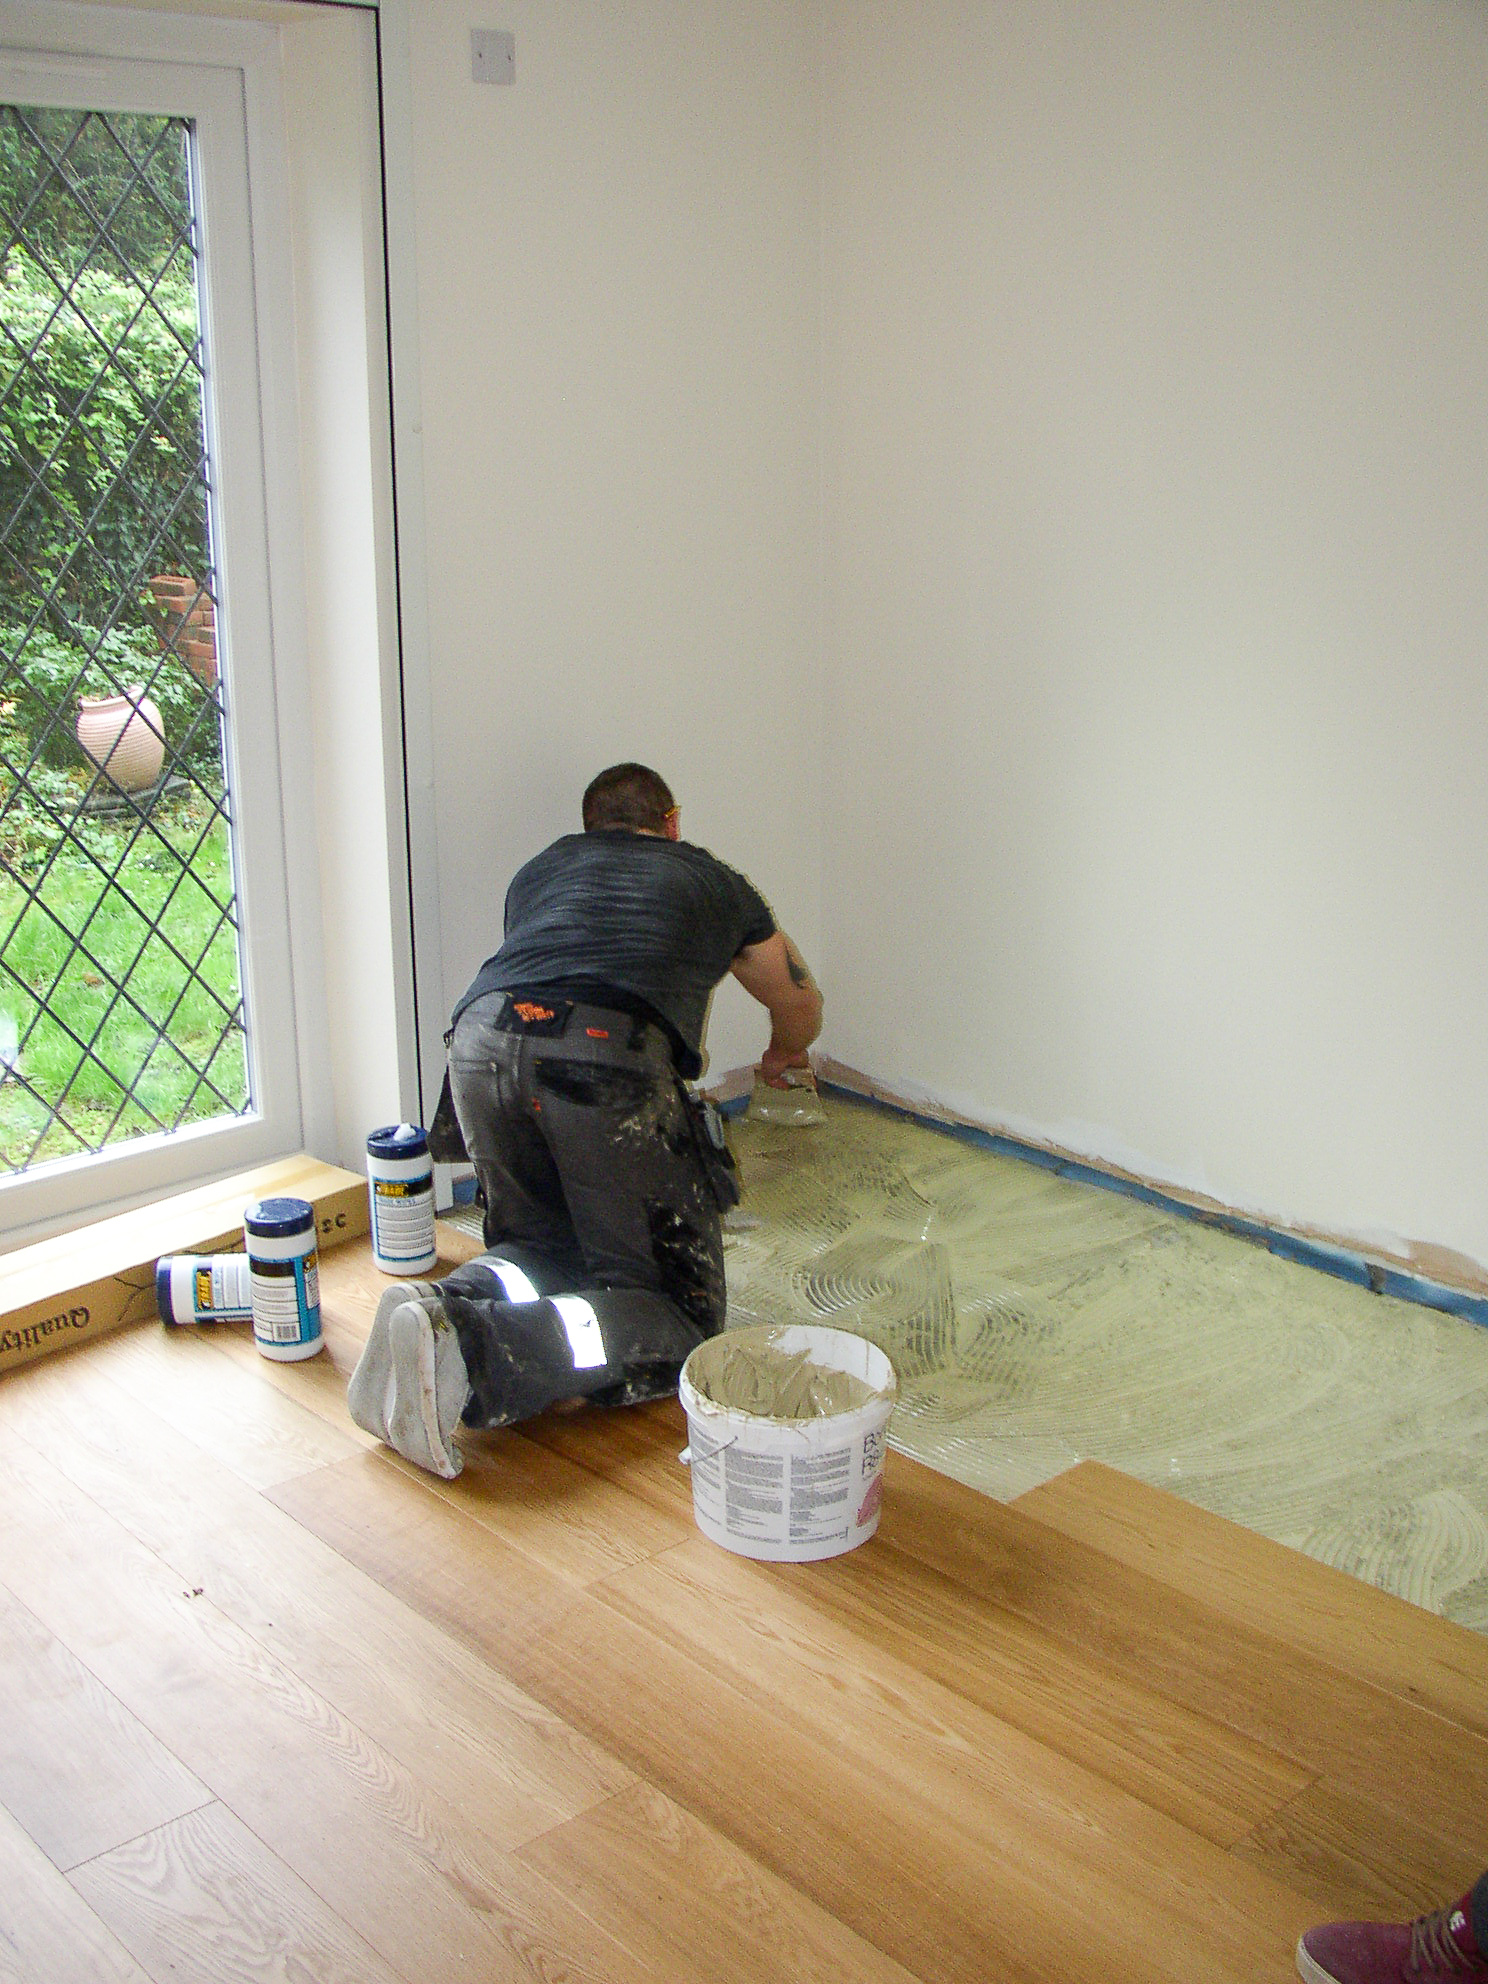 Re-laying a floor after extending